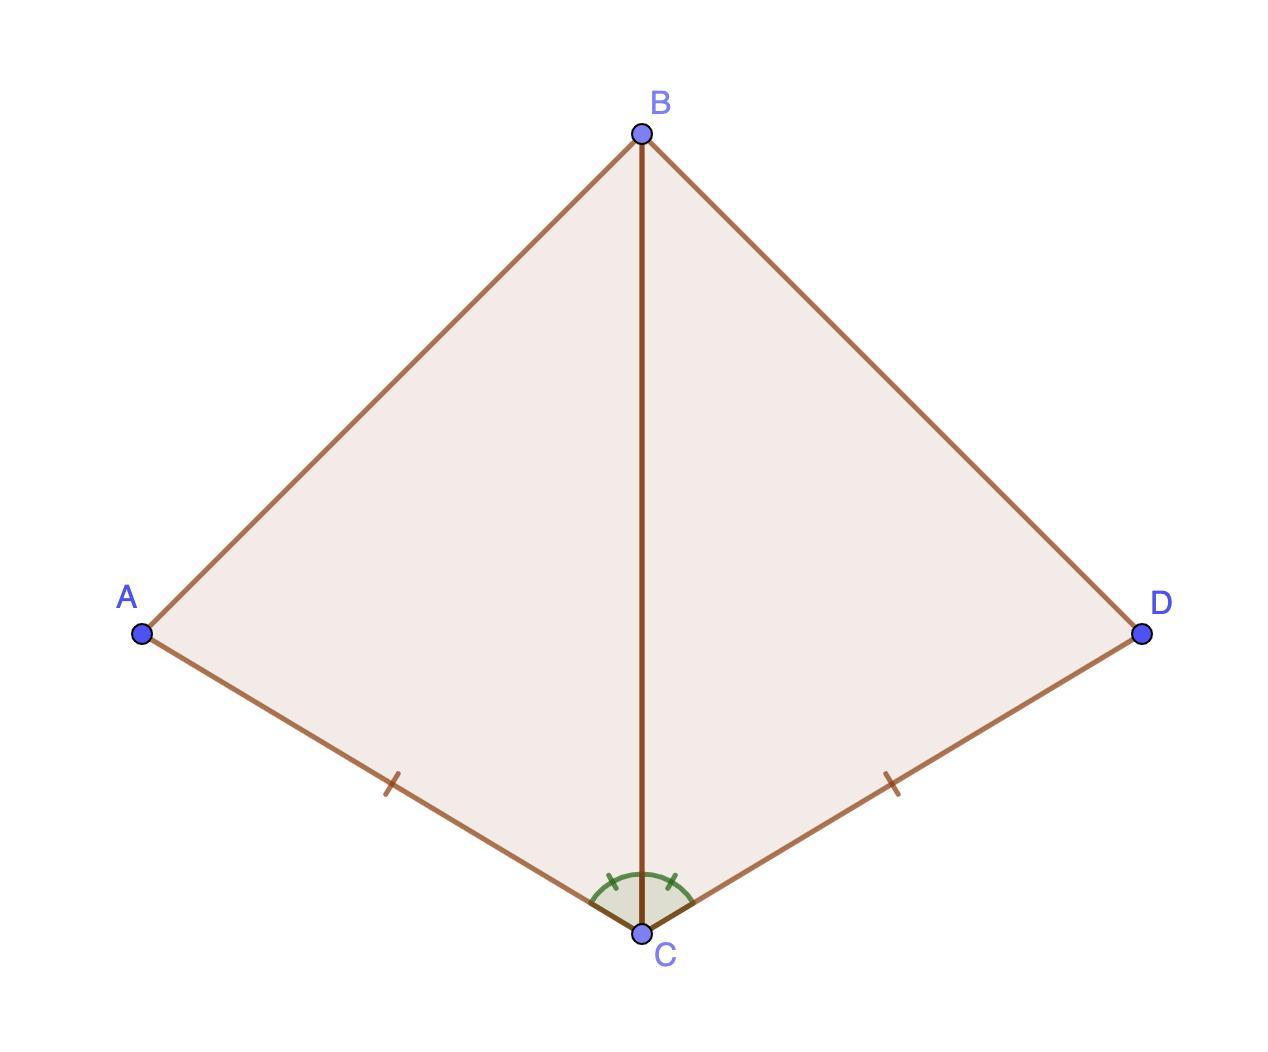 Triangles A B C And D B C Share Common Side B C. Sides A C And C D Are Congruent. In Order To Prove Abc